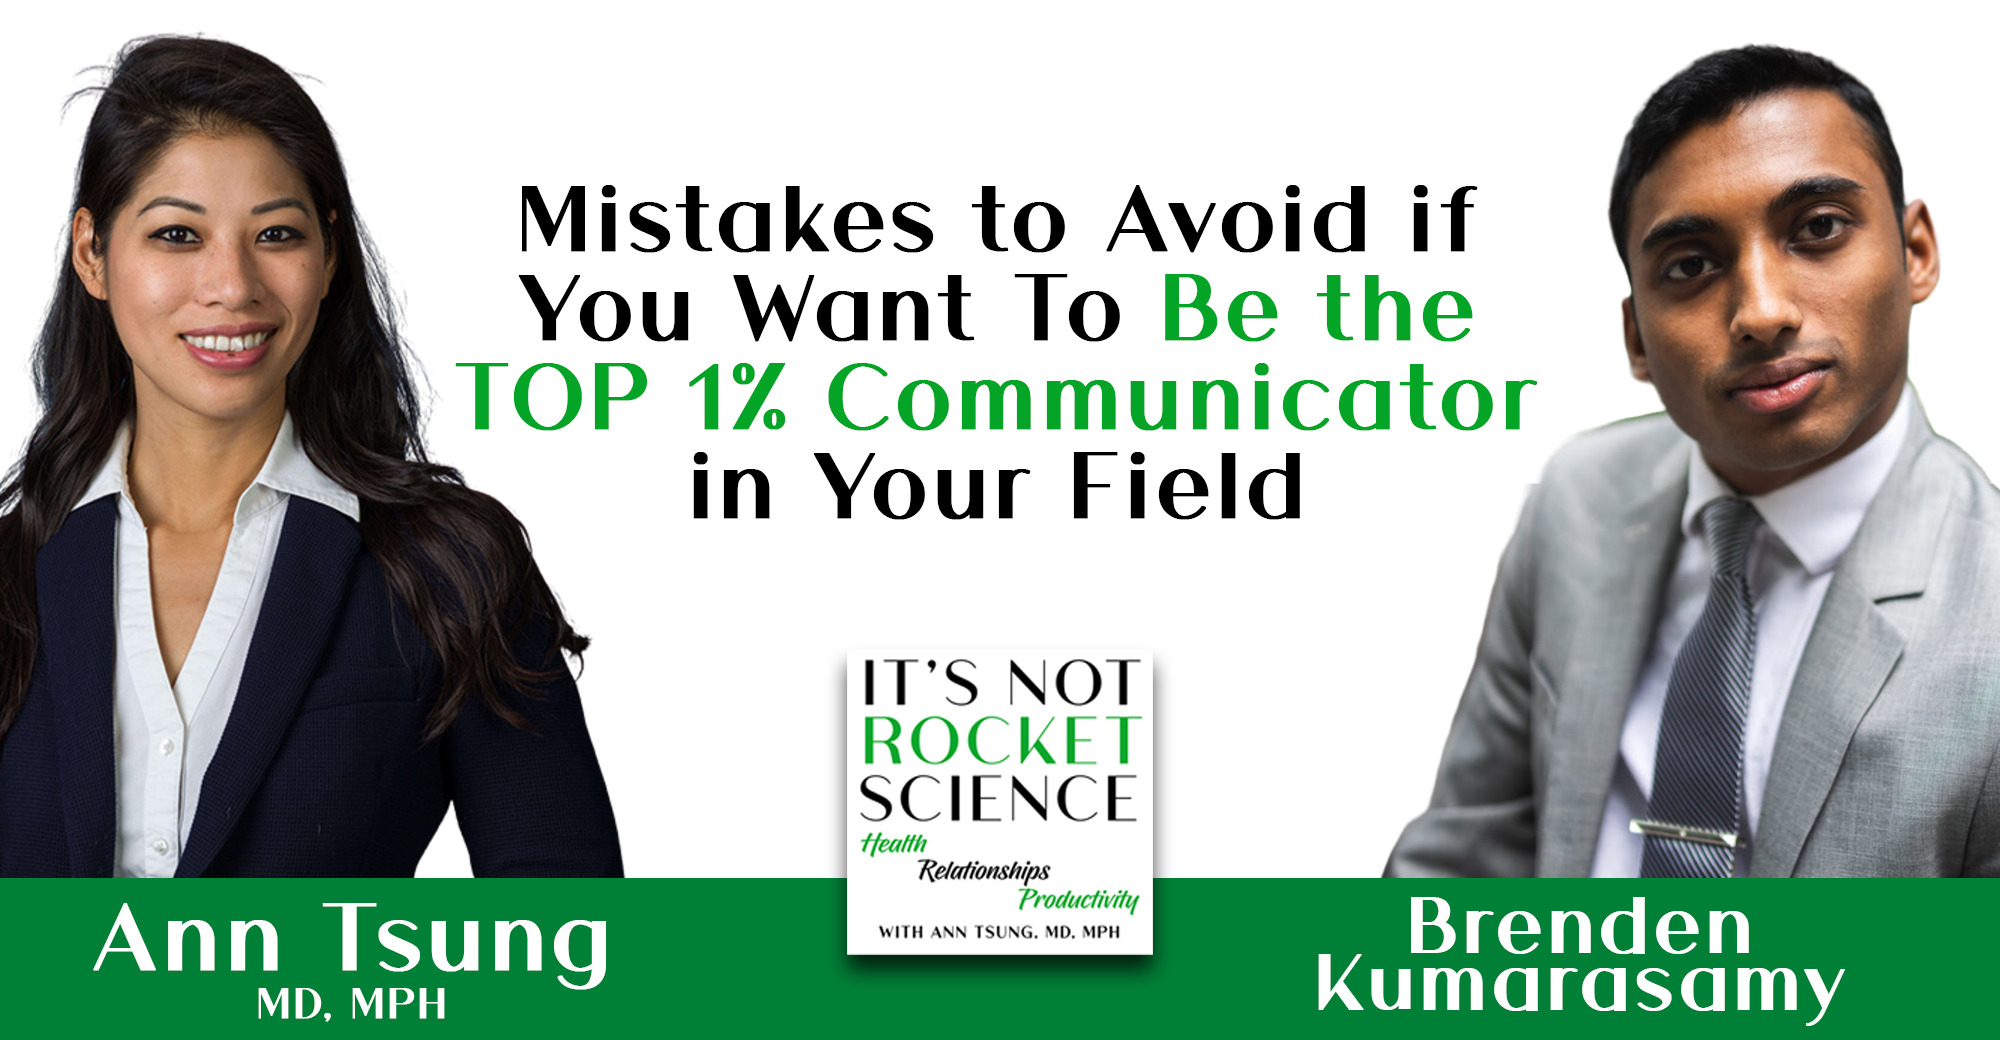 030. Mistakes to Avoid if You Want to Be the TOP 1% Communicator in Your Field – Expert Strategies with Brenden Kumarasamy, Founder of Master Talk